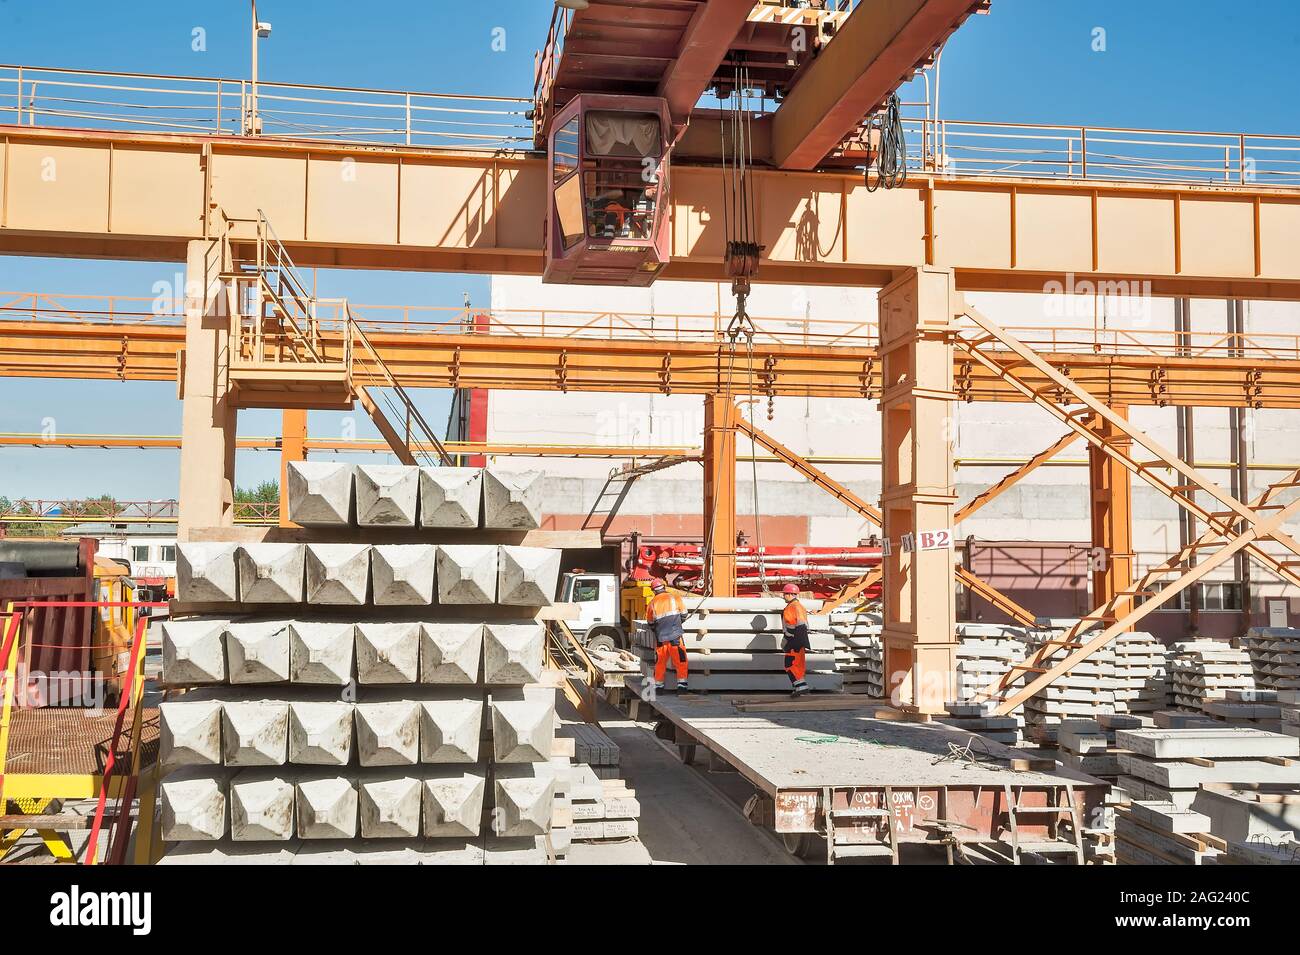 Slinger on workplace. Loading of products. Crane works Stock Photo